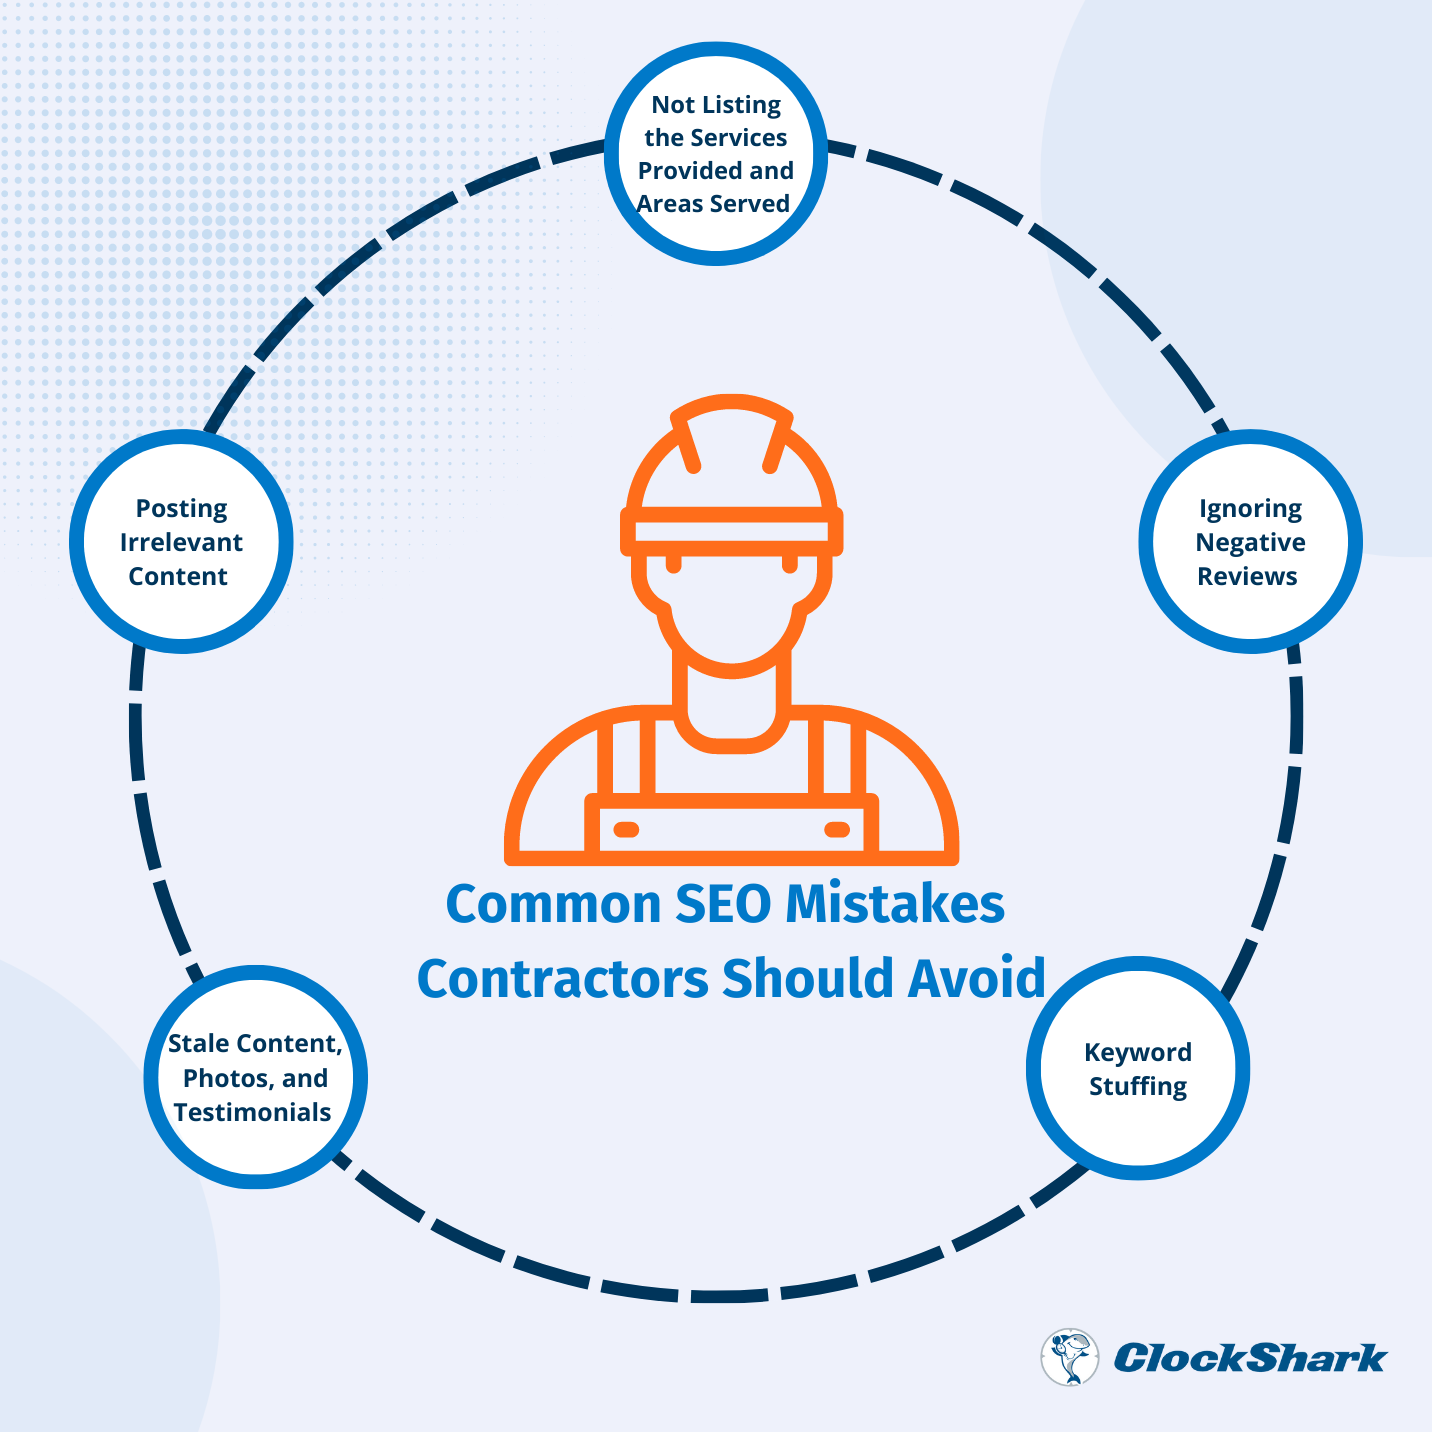 Common SEO Mistakes Contractors Should Avoid